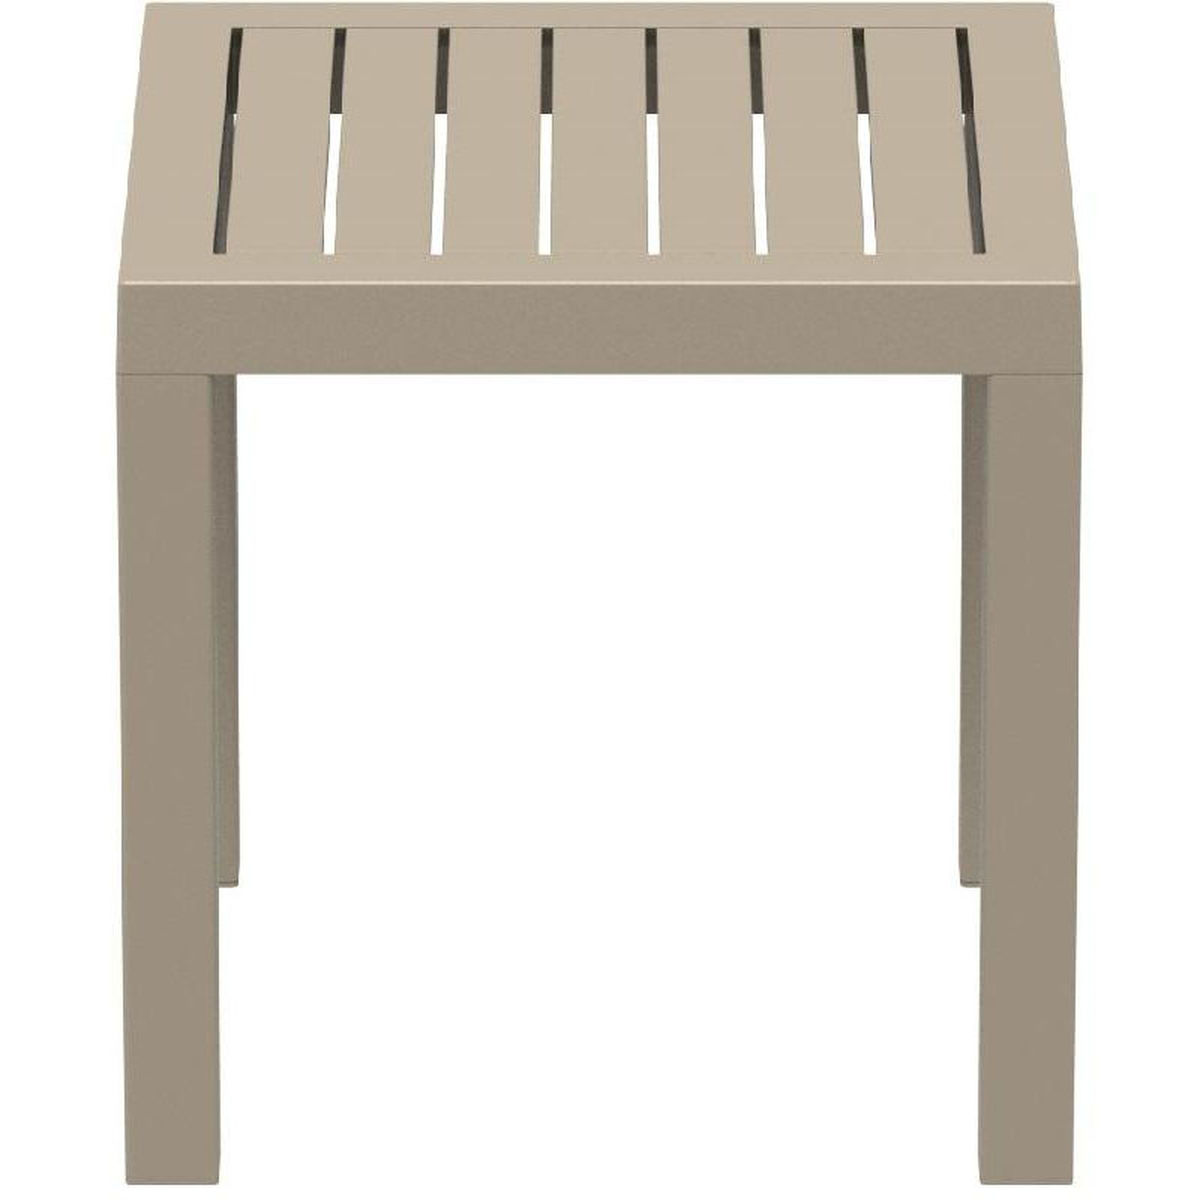 gray outdoor square side table dvr compamia cmp our ocean resin dove now sun porch furniture dining with umbrella hole backyard stand door designs for rooms woodard accent narrow